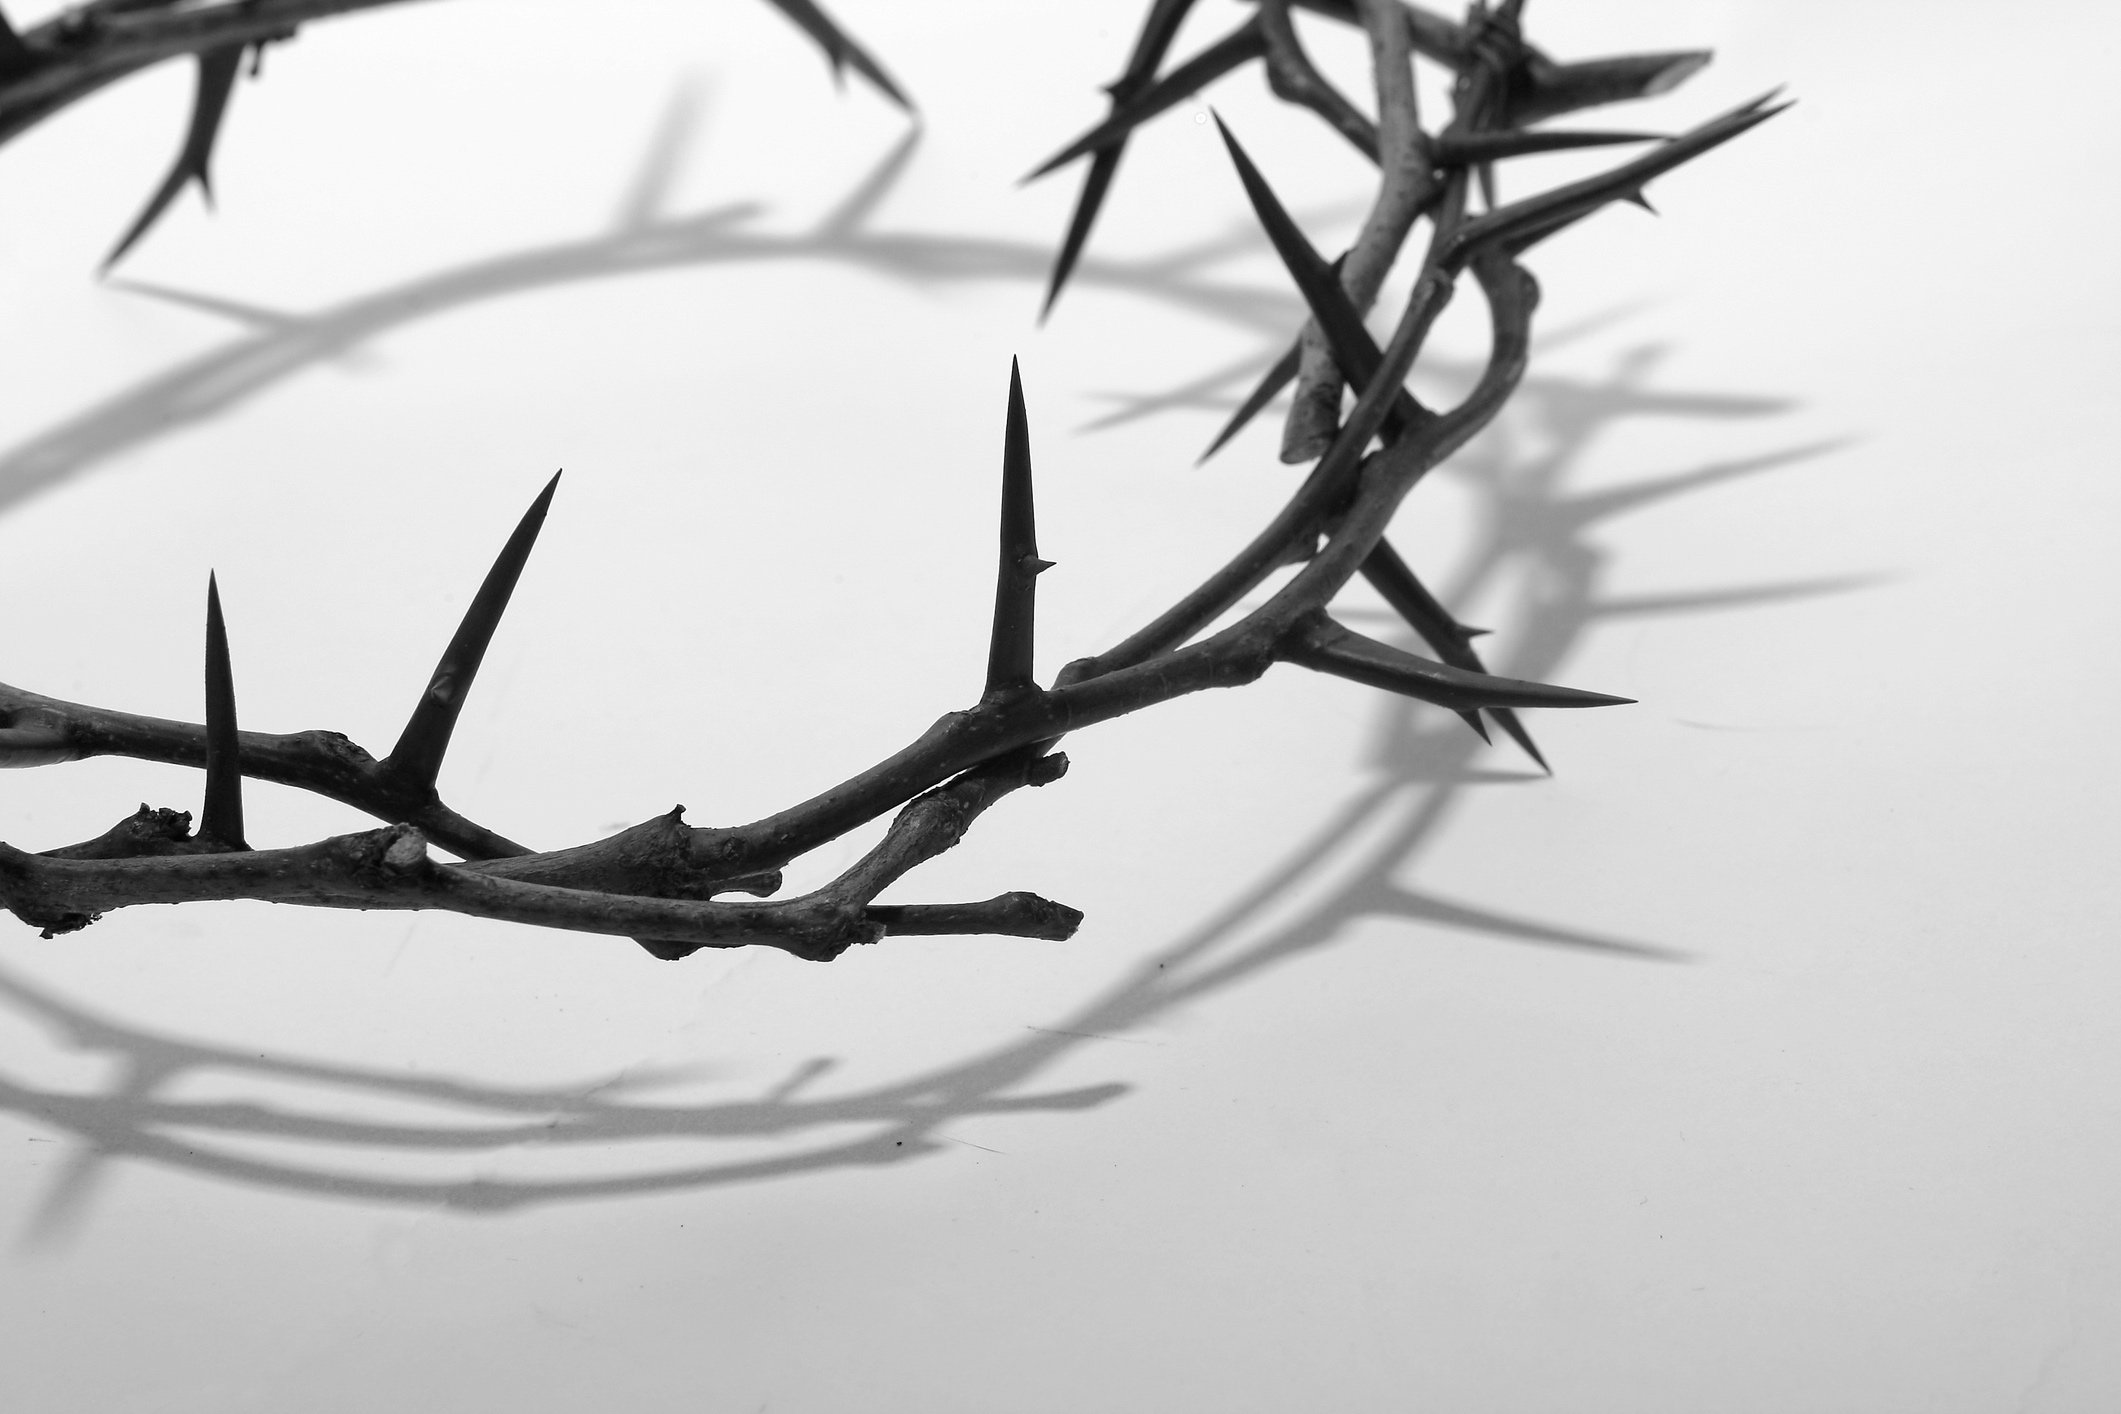 A crown of thorns representing Christian suffering